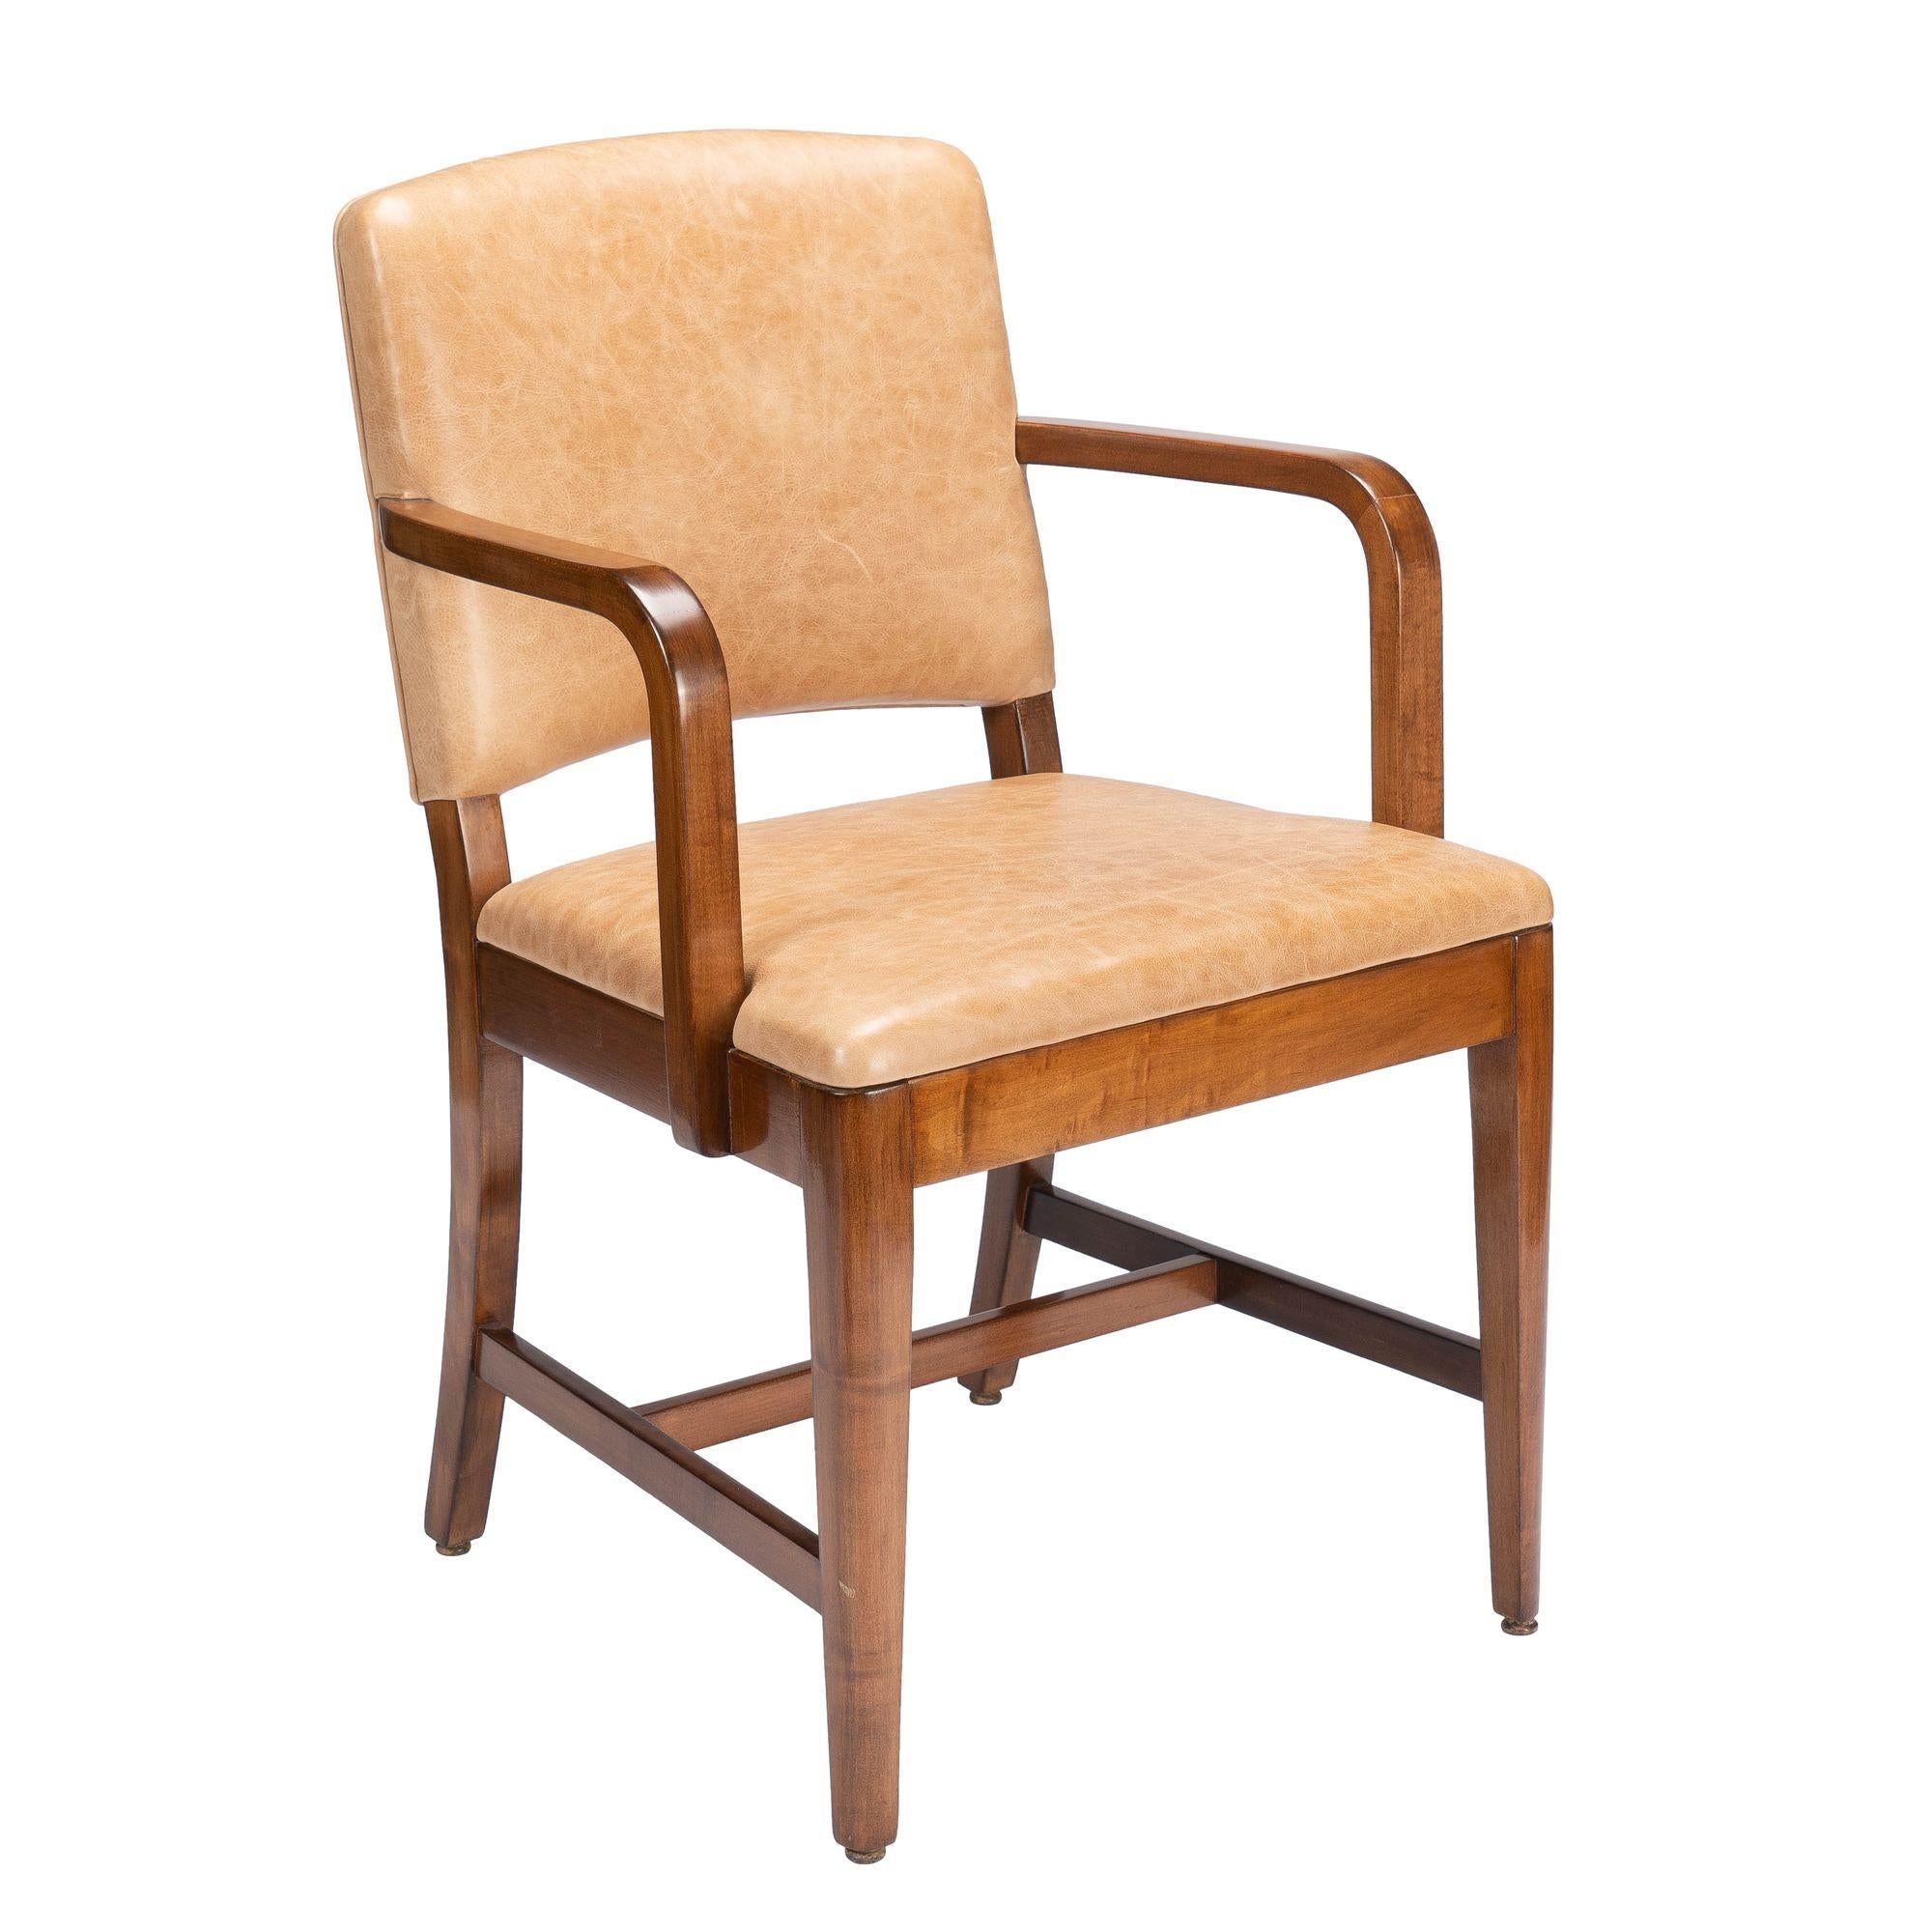 American Modernist Maple & Leather Armchair, c. 1940 For Sale 3